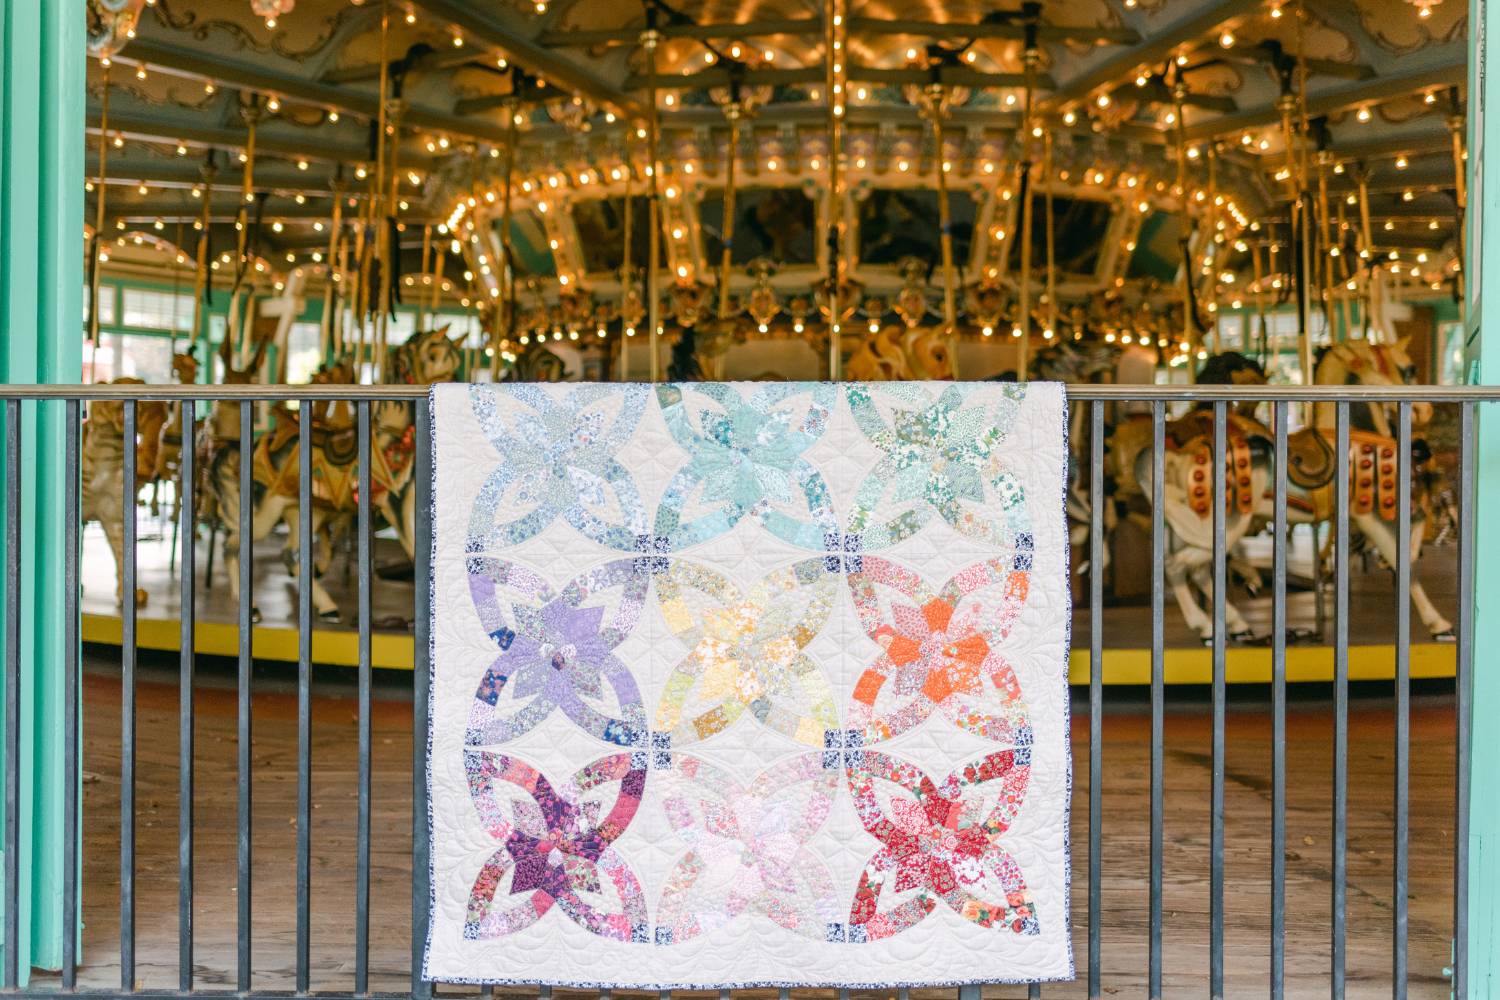 A quilt of large interlocking four-pronged stars, each a different color, ranging from light blue to dark rad on a white background. The quilt is hanging on a black metal fence outside of a lit-up carousel inside a pavilion.